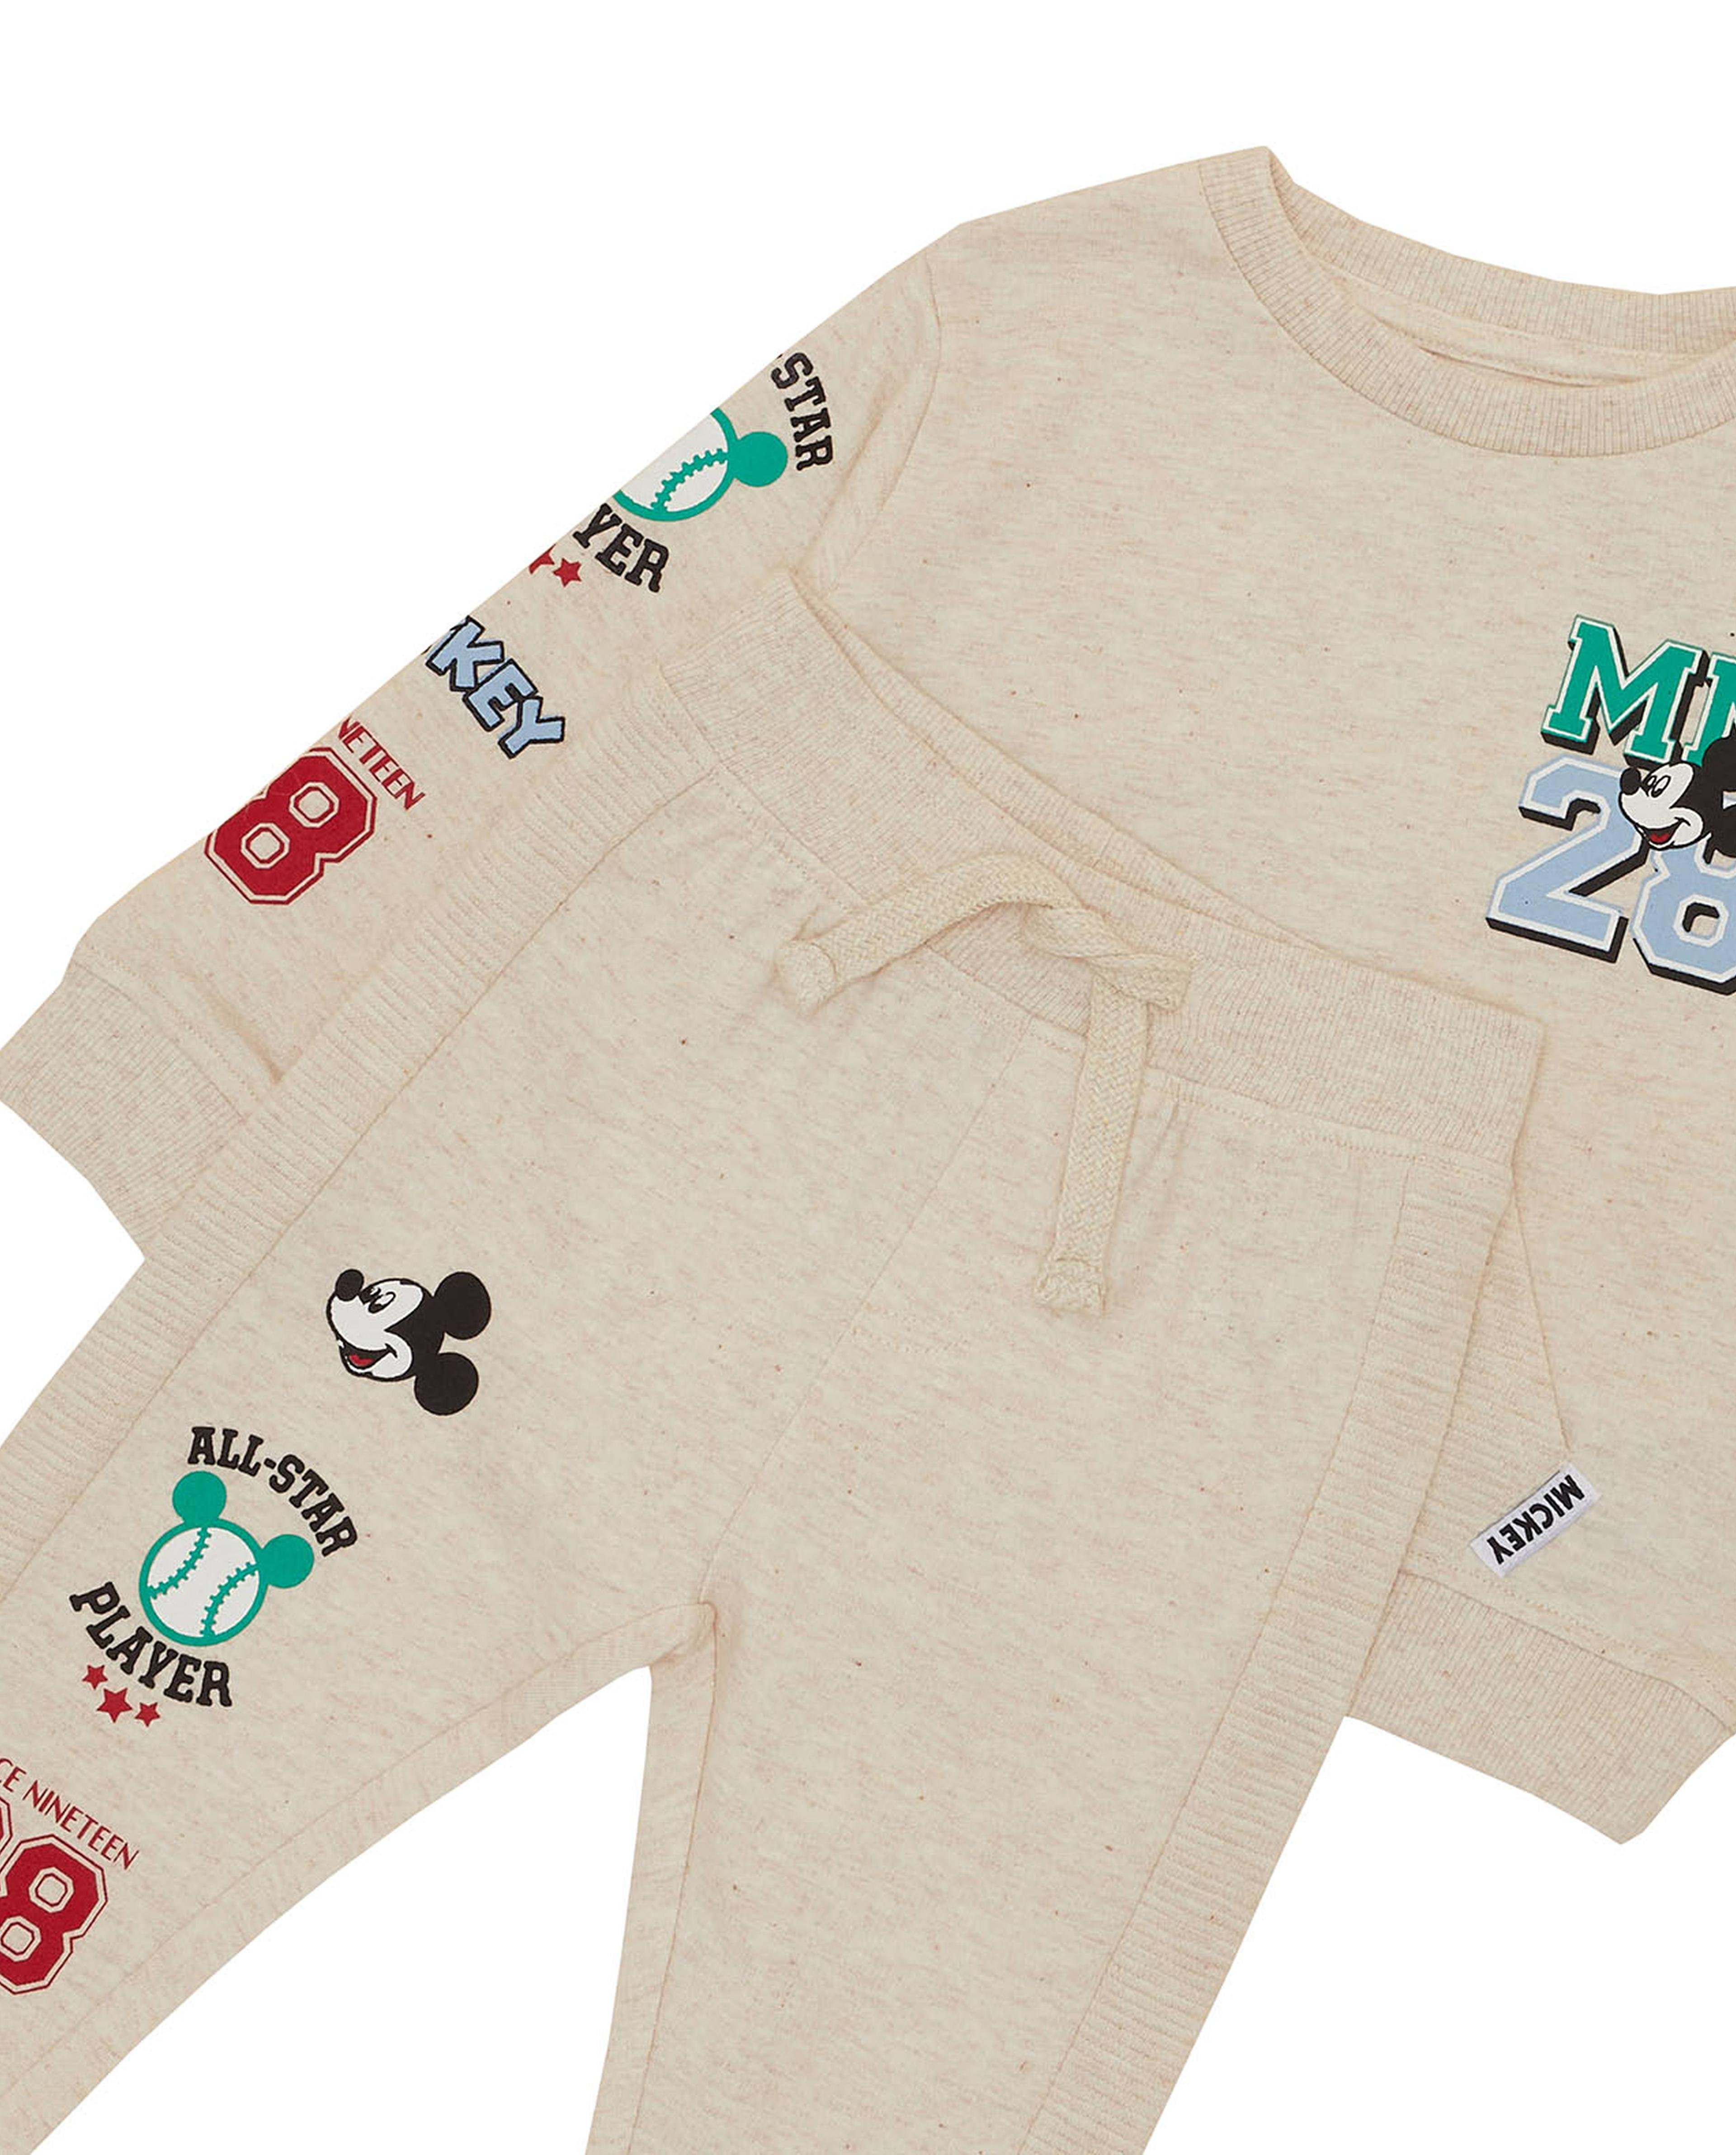 Mickey Mouse Printed Sweatsuit Set